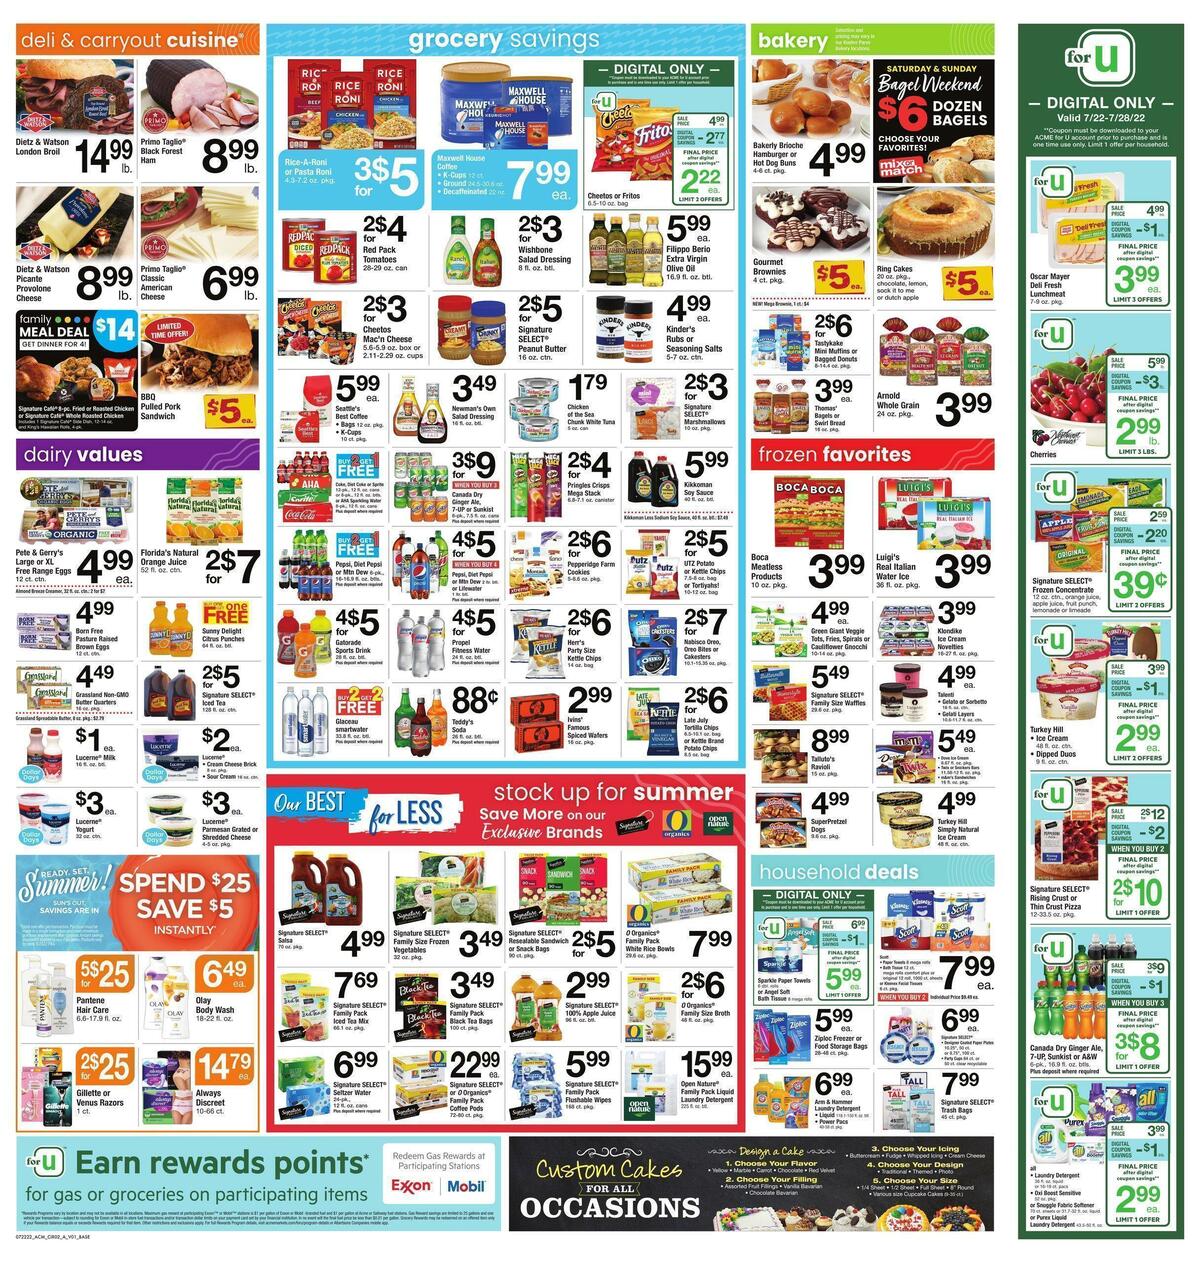 ACME Markets Weekly Ad from July 22